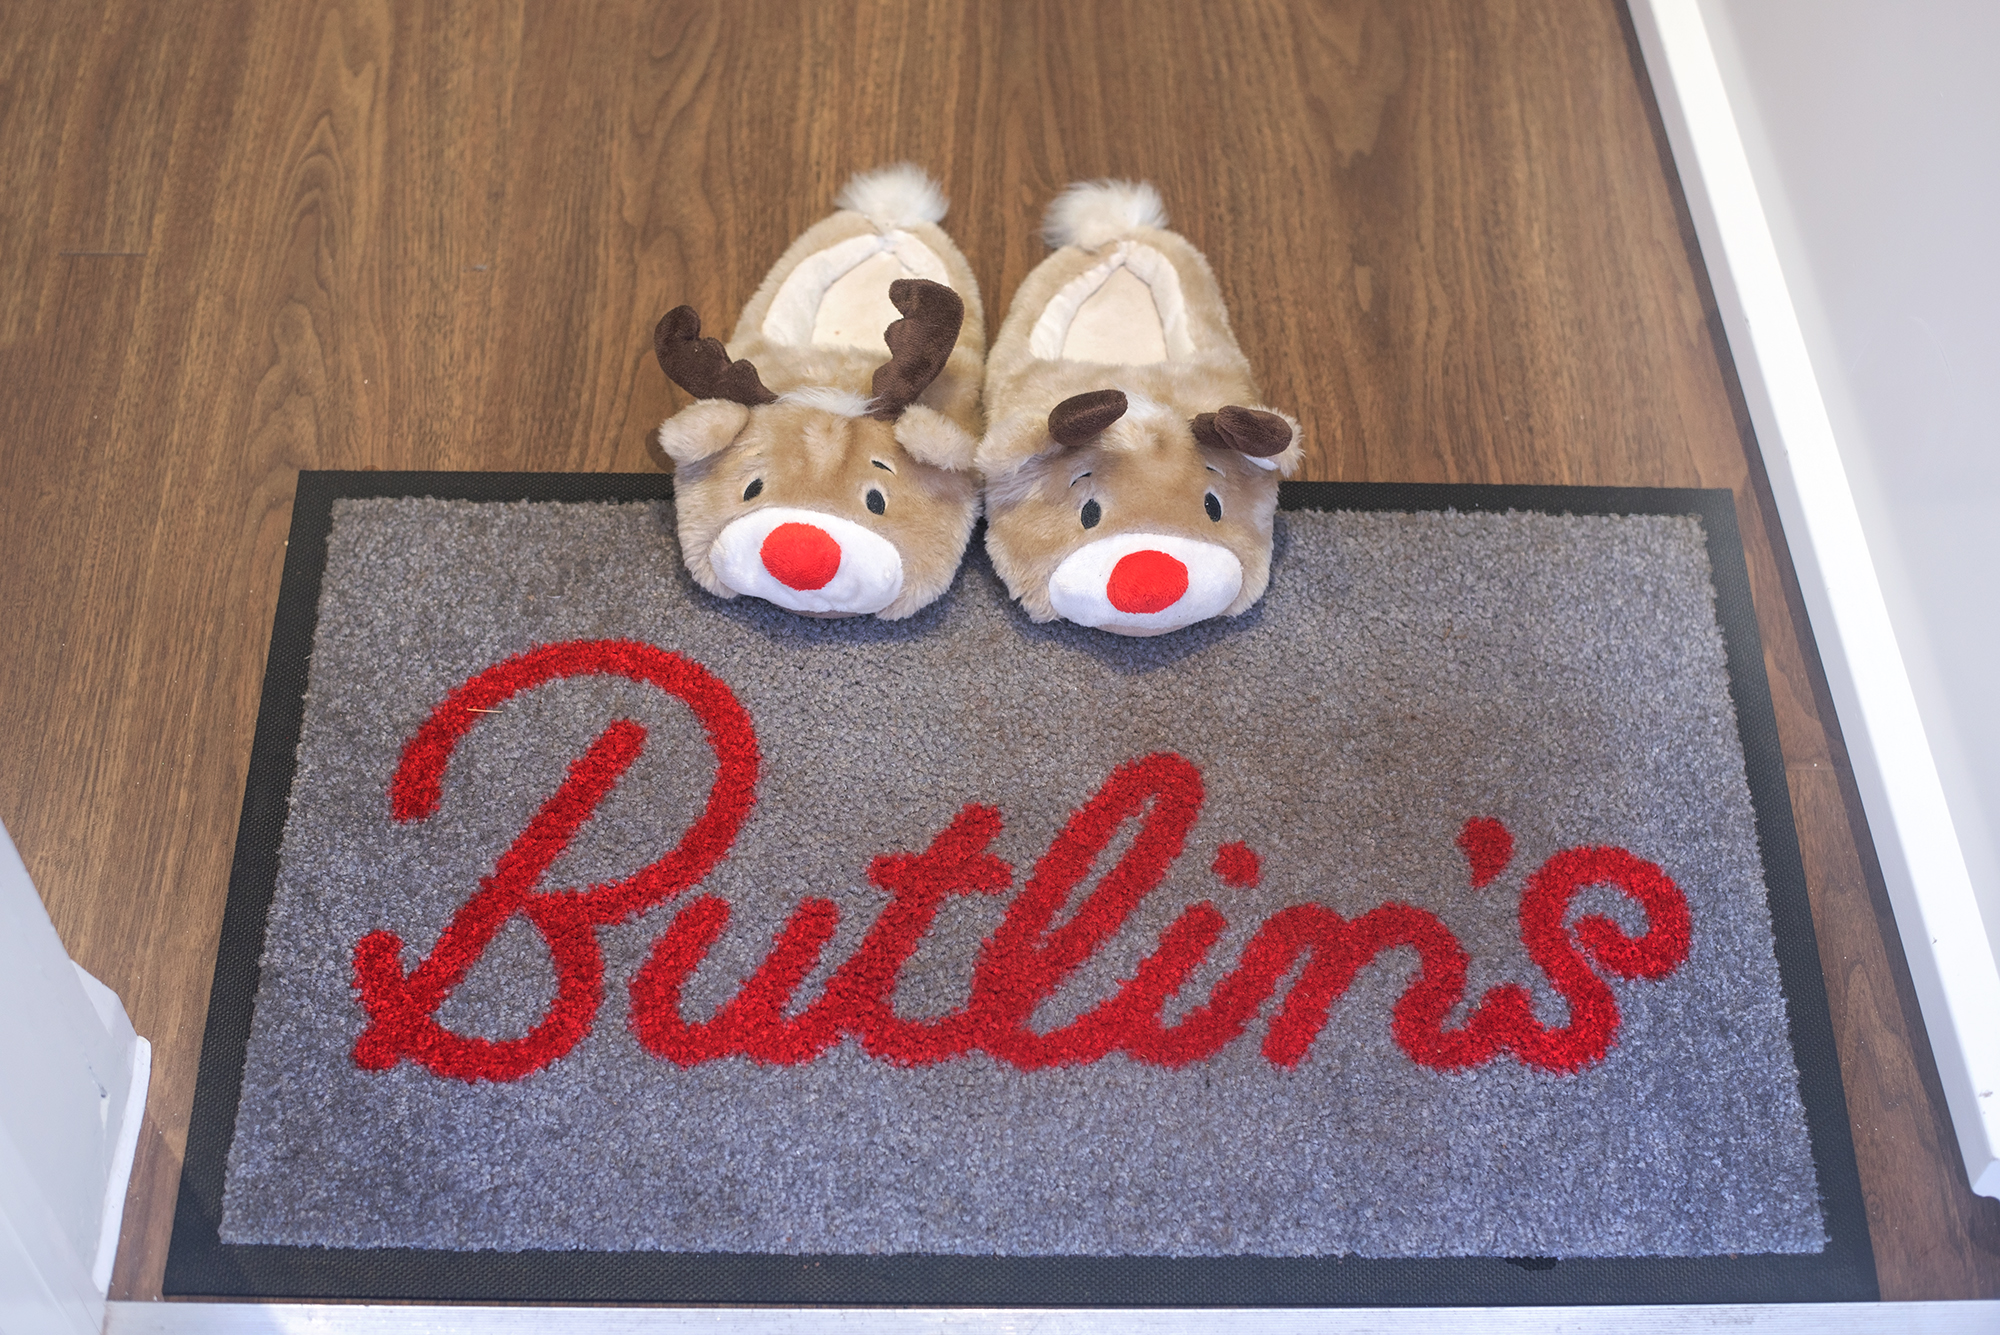 THE CHRISTMAS EXPERIENCE AT BUTLINS: THE FINAL DAY